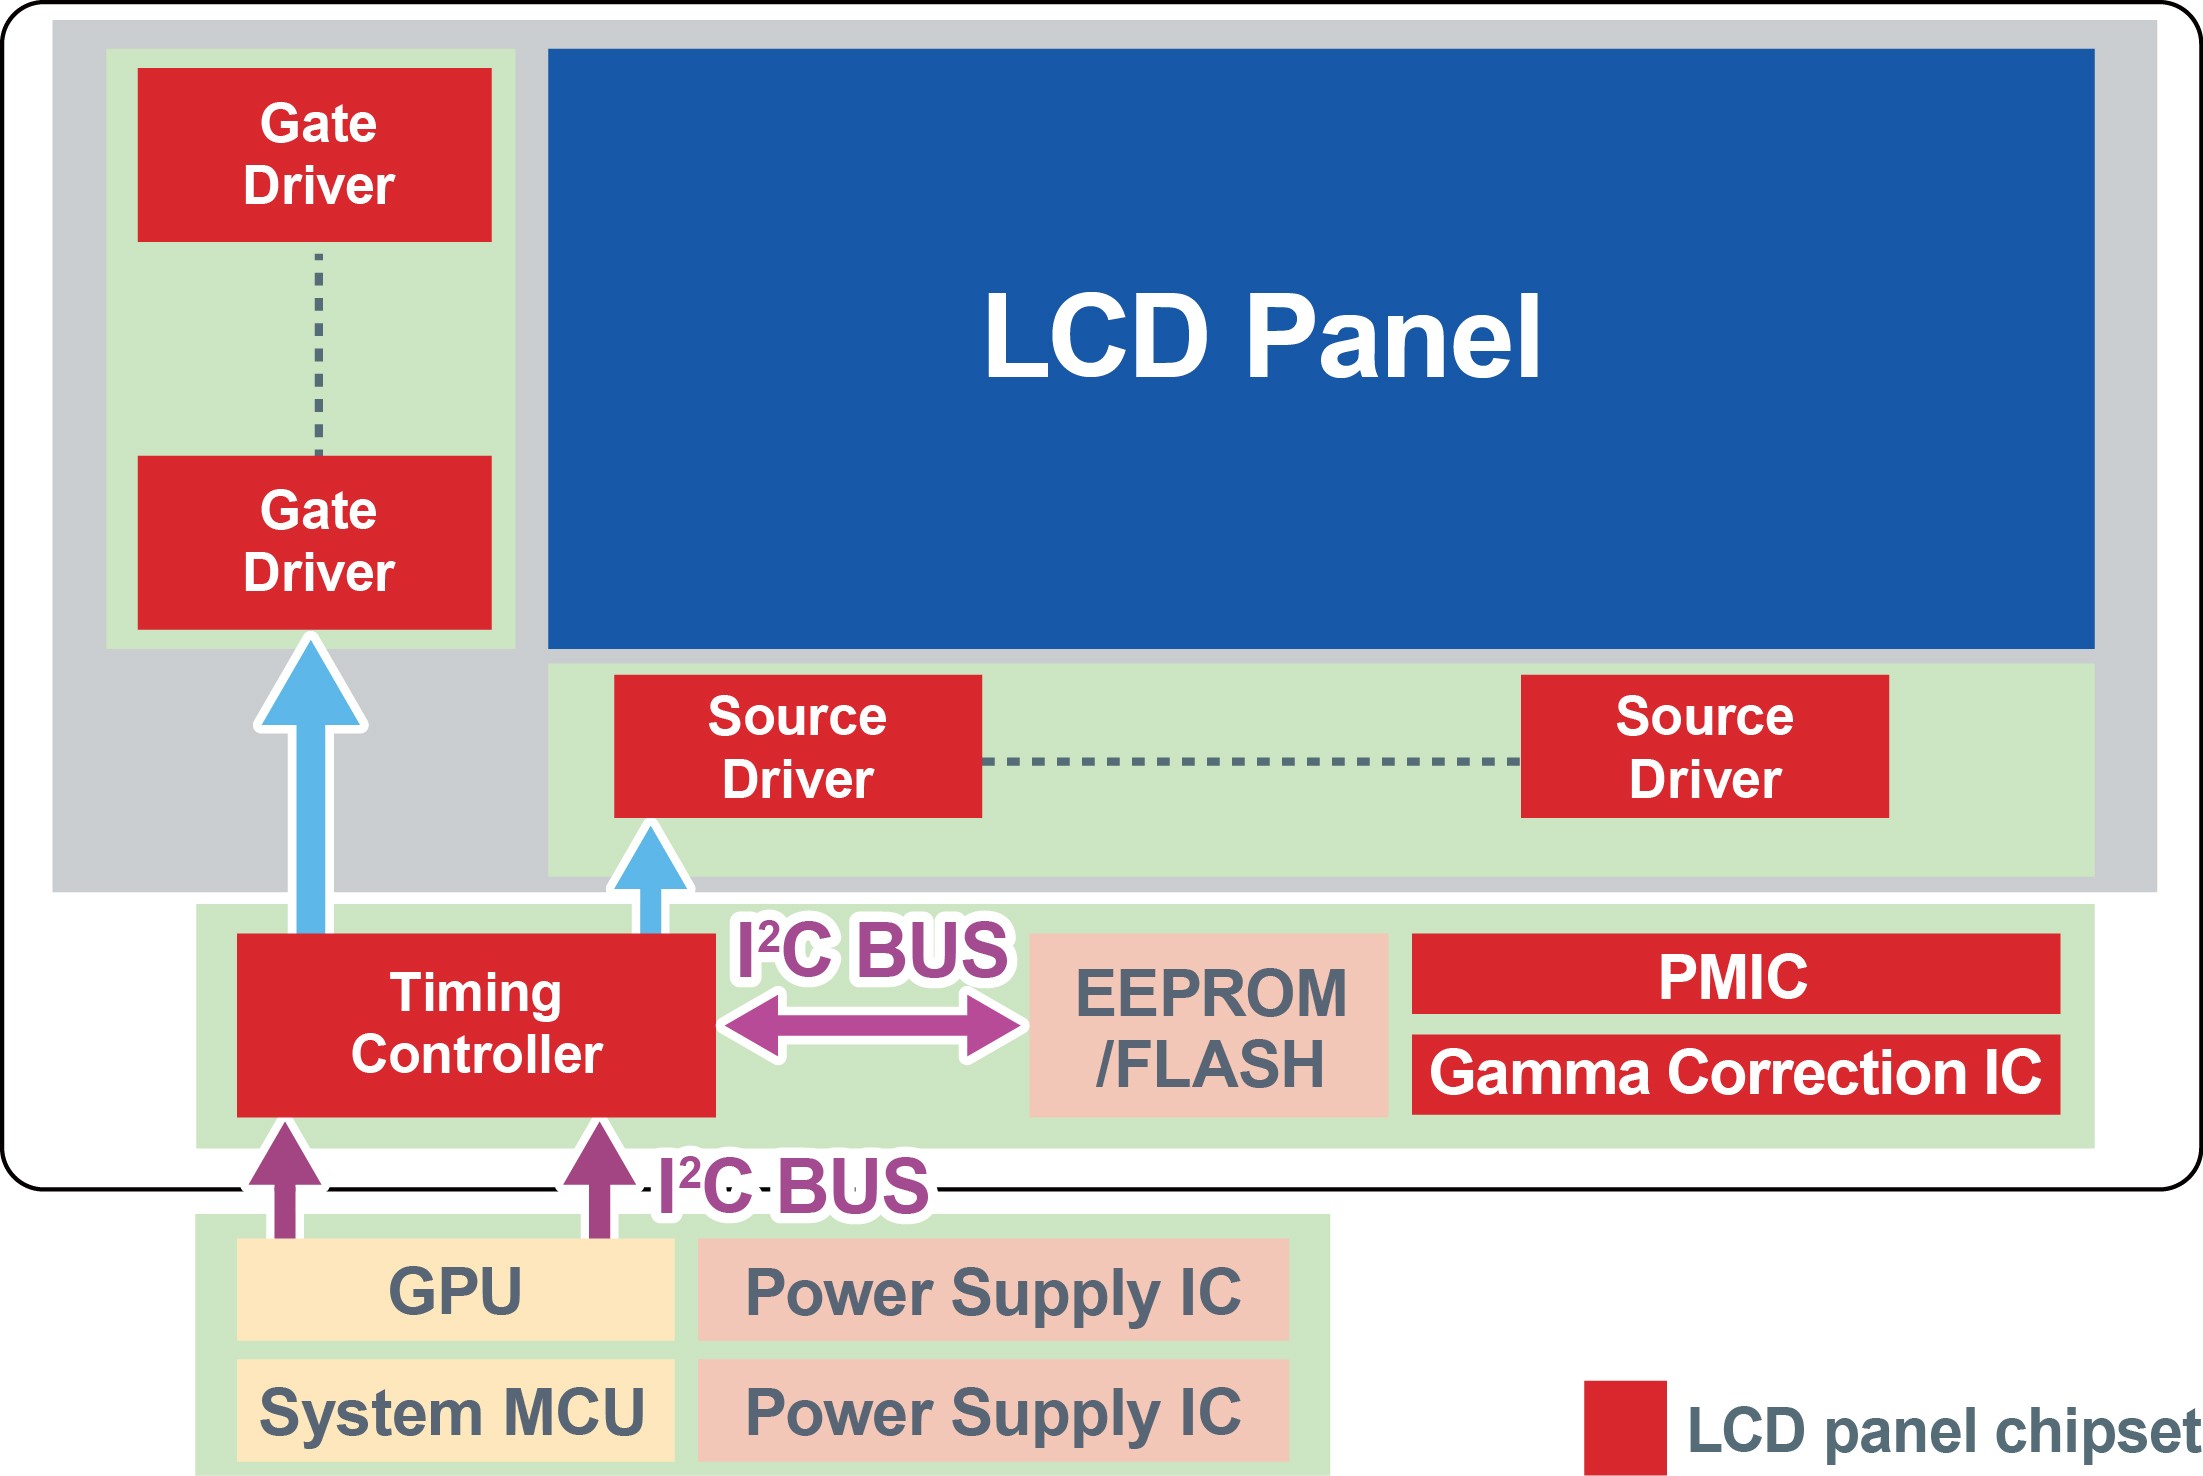 Chipsets for High Definition LCD Panels